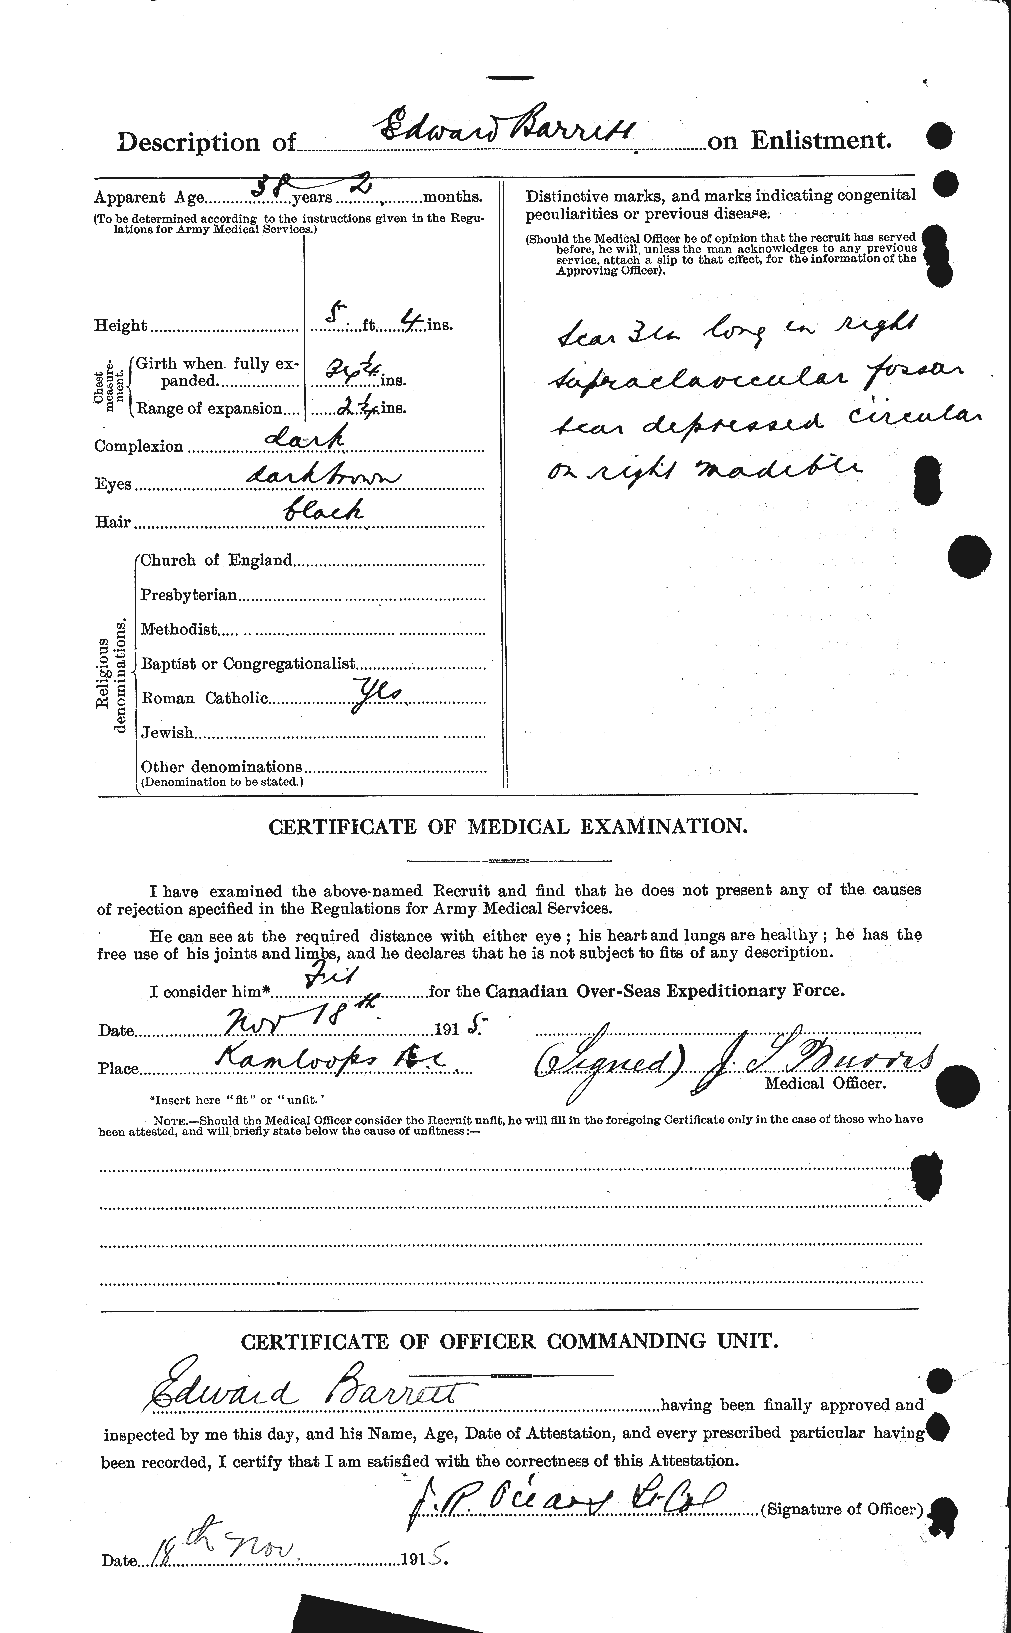 Personnel Records of the First World War - CEF 220362b